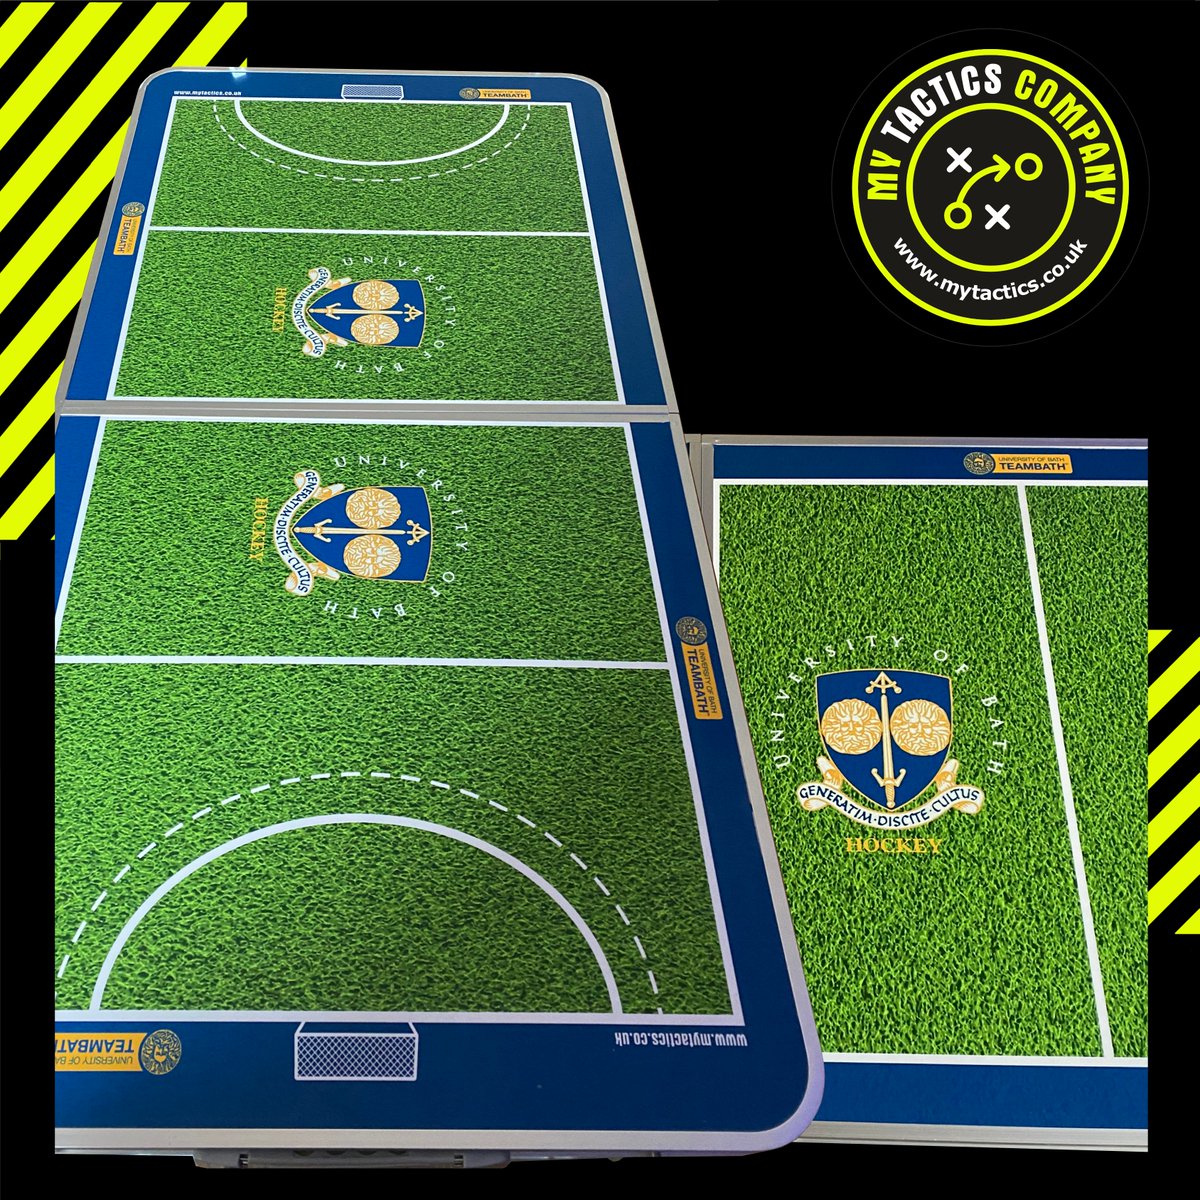 A big thank you to @UOBathHockey for their order last week, We hope our product can enable continued player development. To get yours visit mytactics.co.uk #football #basketball #futsal #netball #rugby #hockey #coaching #coach #sports #MTC #Tactics #tactical